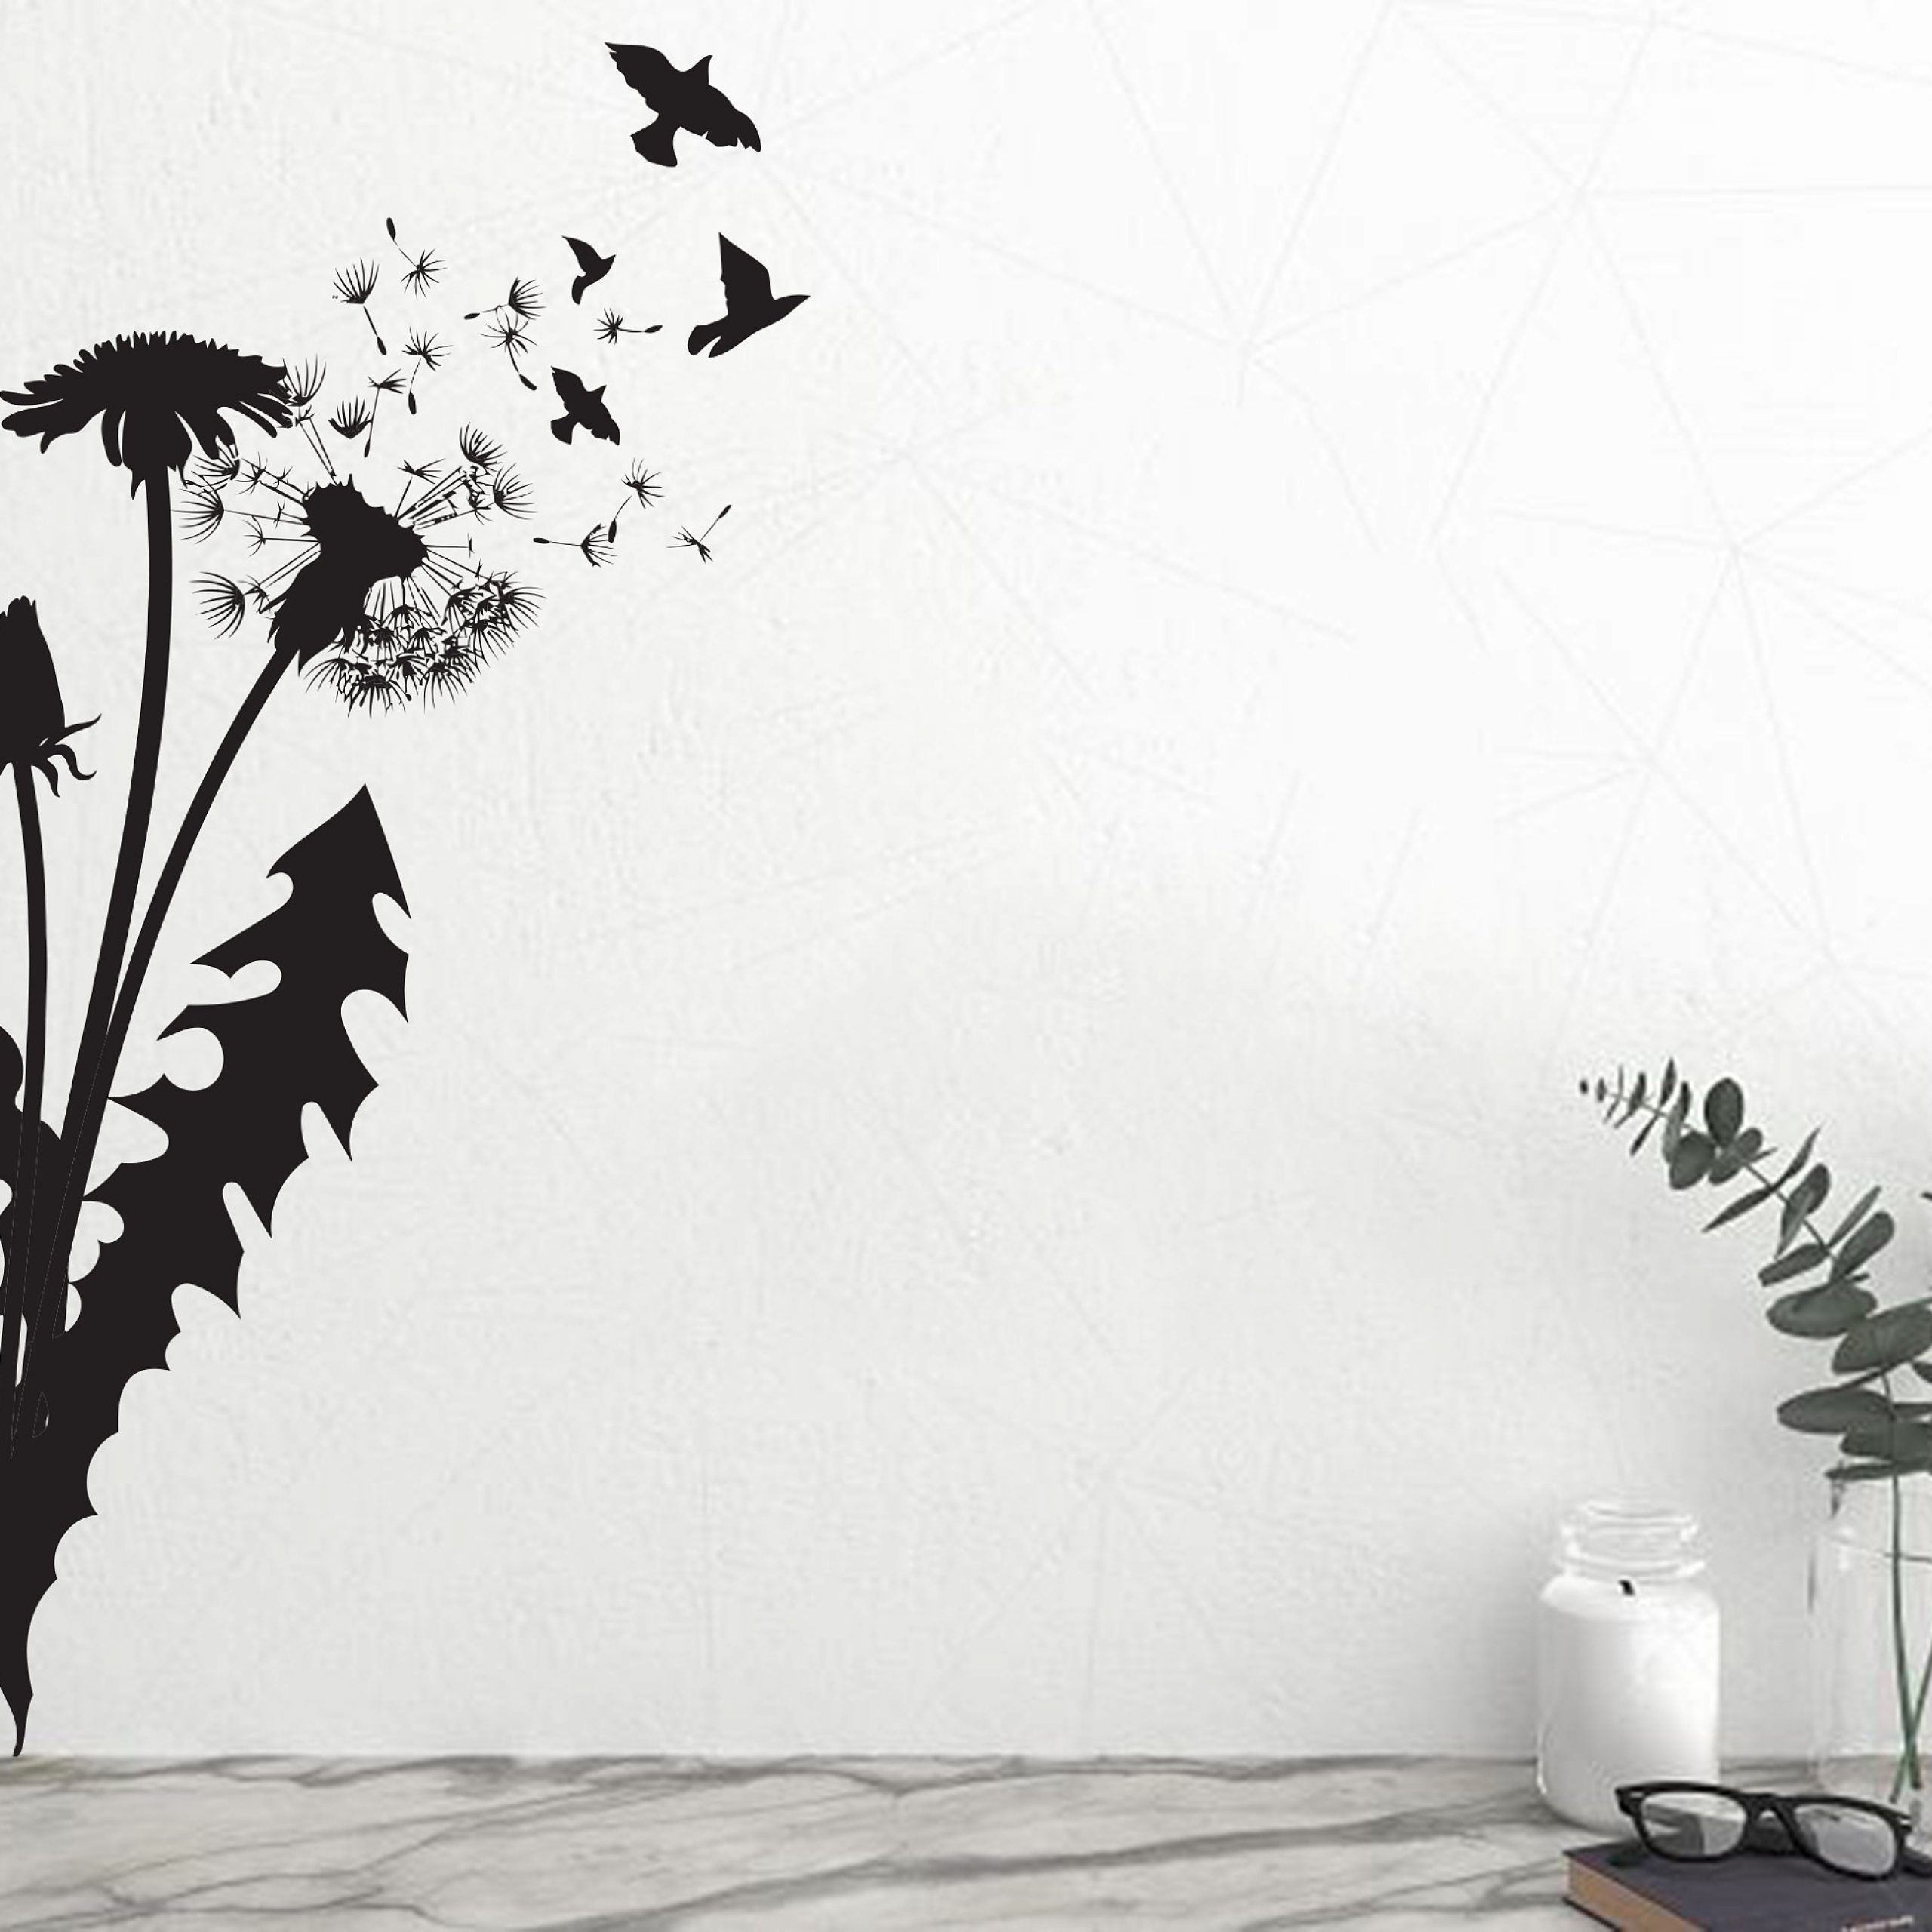 Dandelion And Flying Birds Wall Art Decor Dandelion Wall Decal – Etsy  Ireland Within Flying Dandelion Wall Art (View 11 of 15)